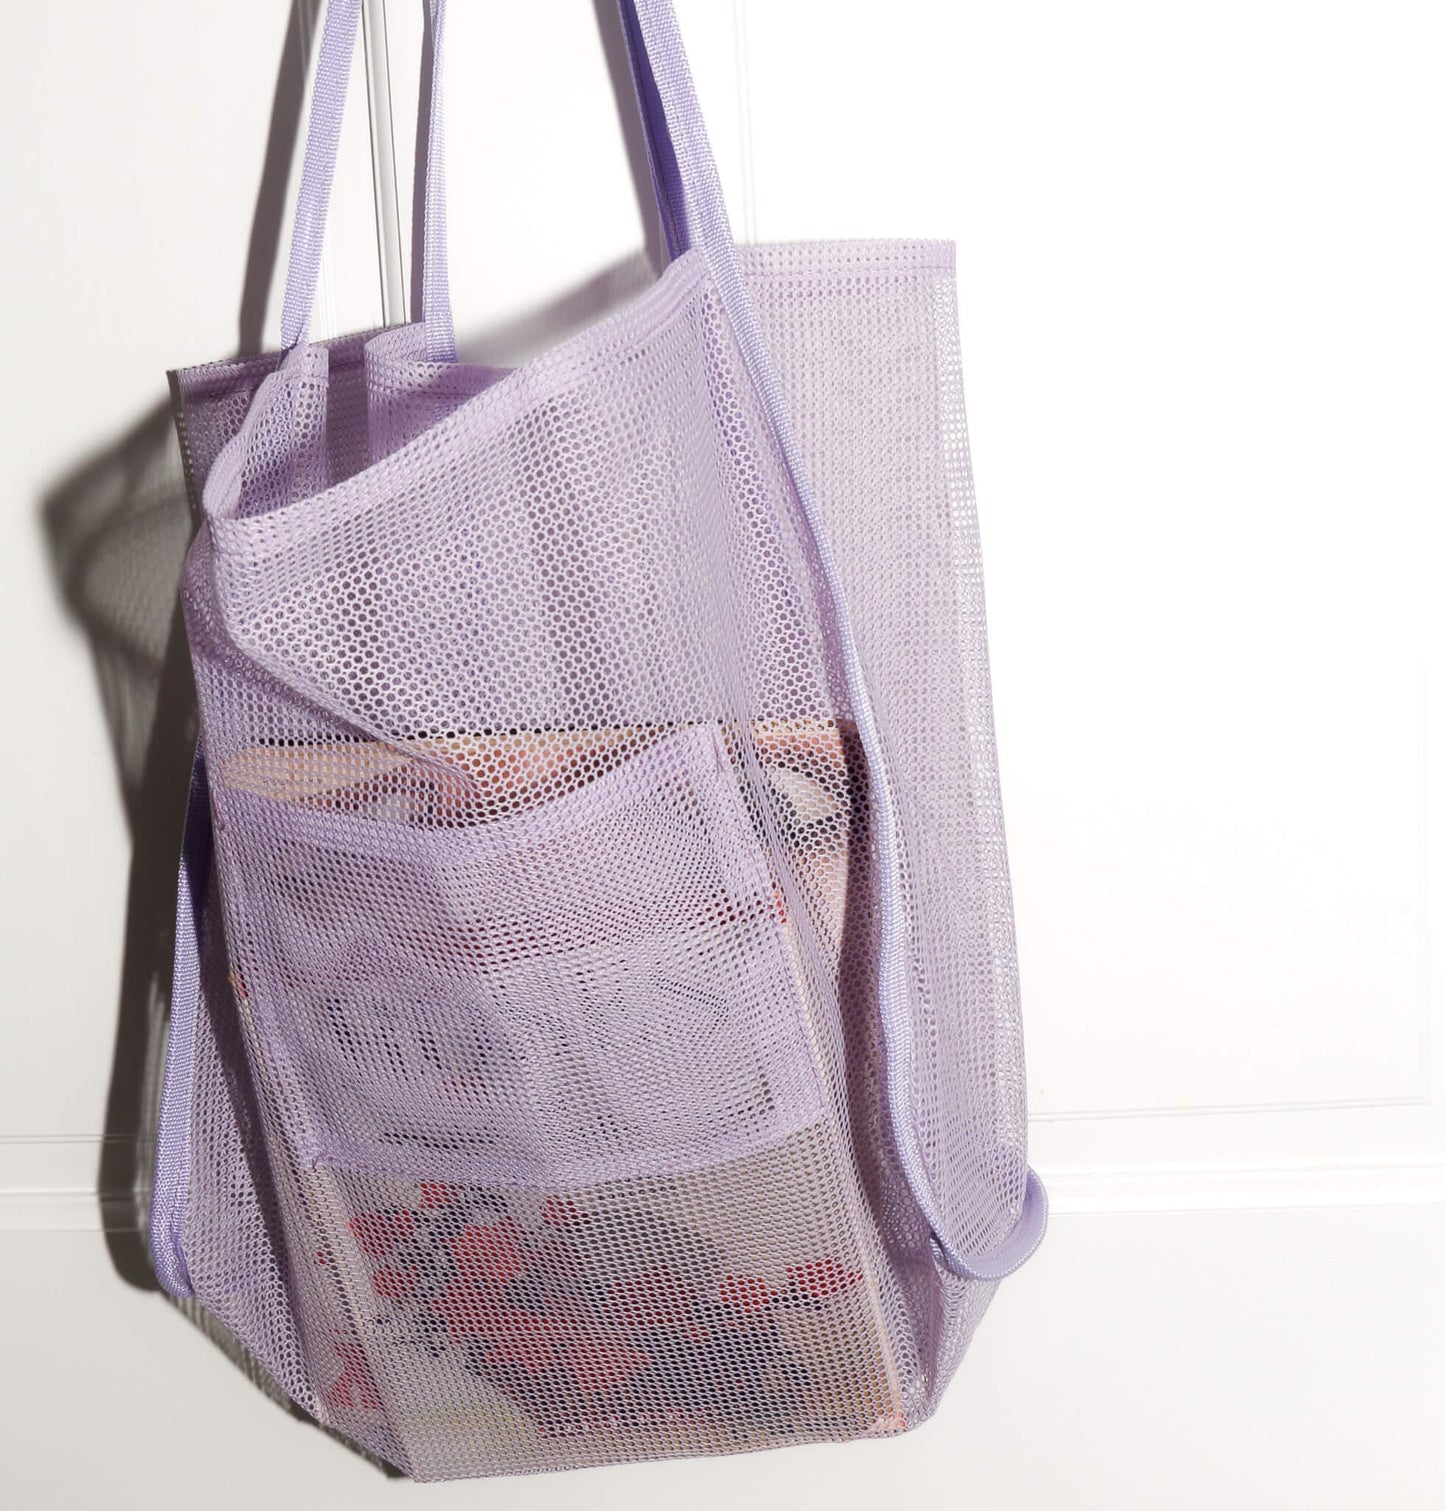 Sunday Forever Apparel & Accessories NEW! Mesh Tote Bag